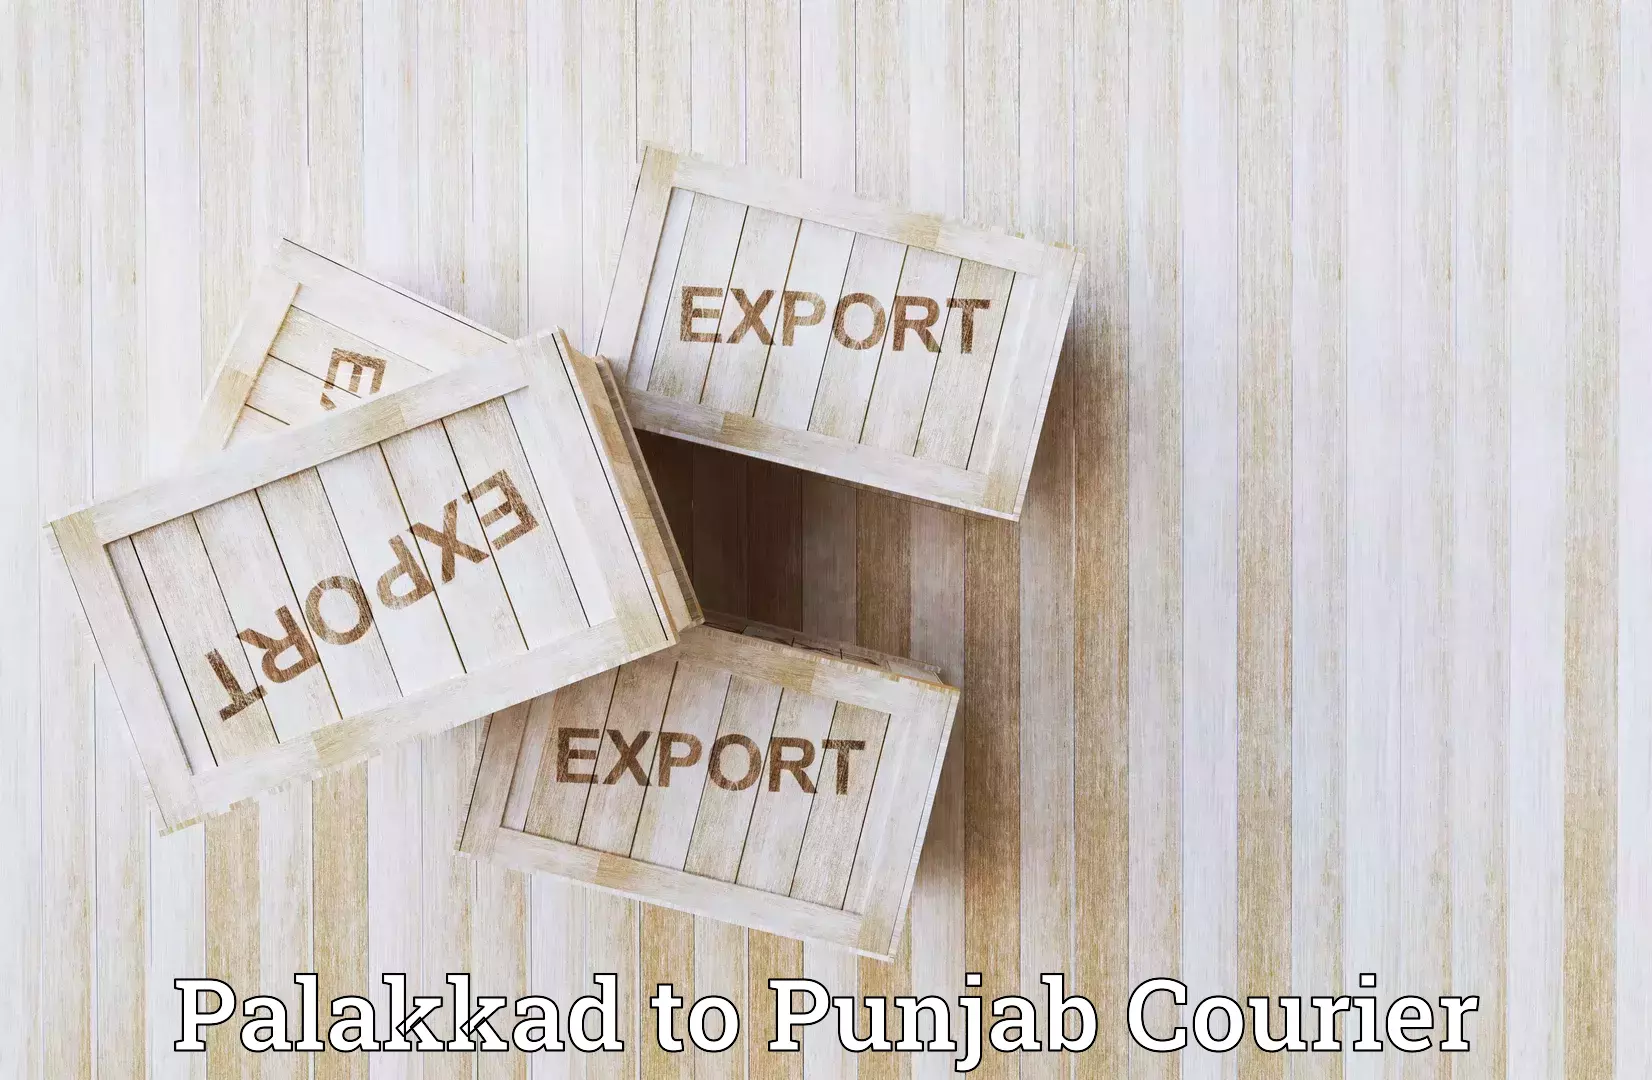 Efficient parcel service Palakkad to Pathankot